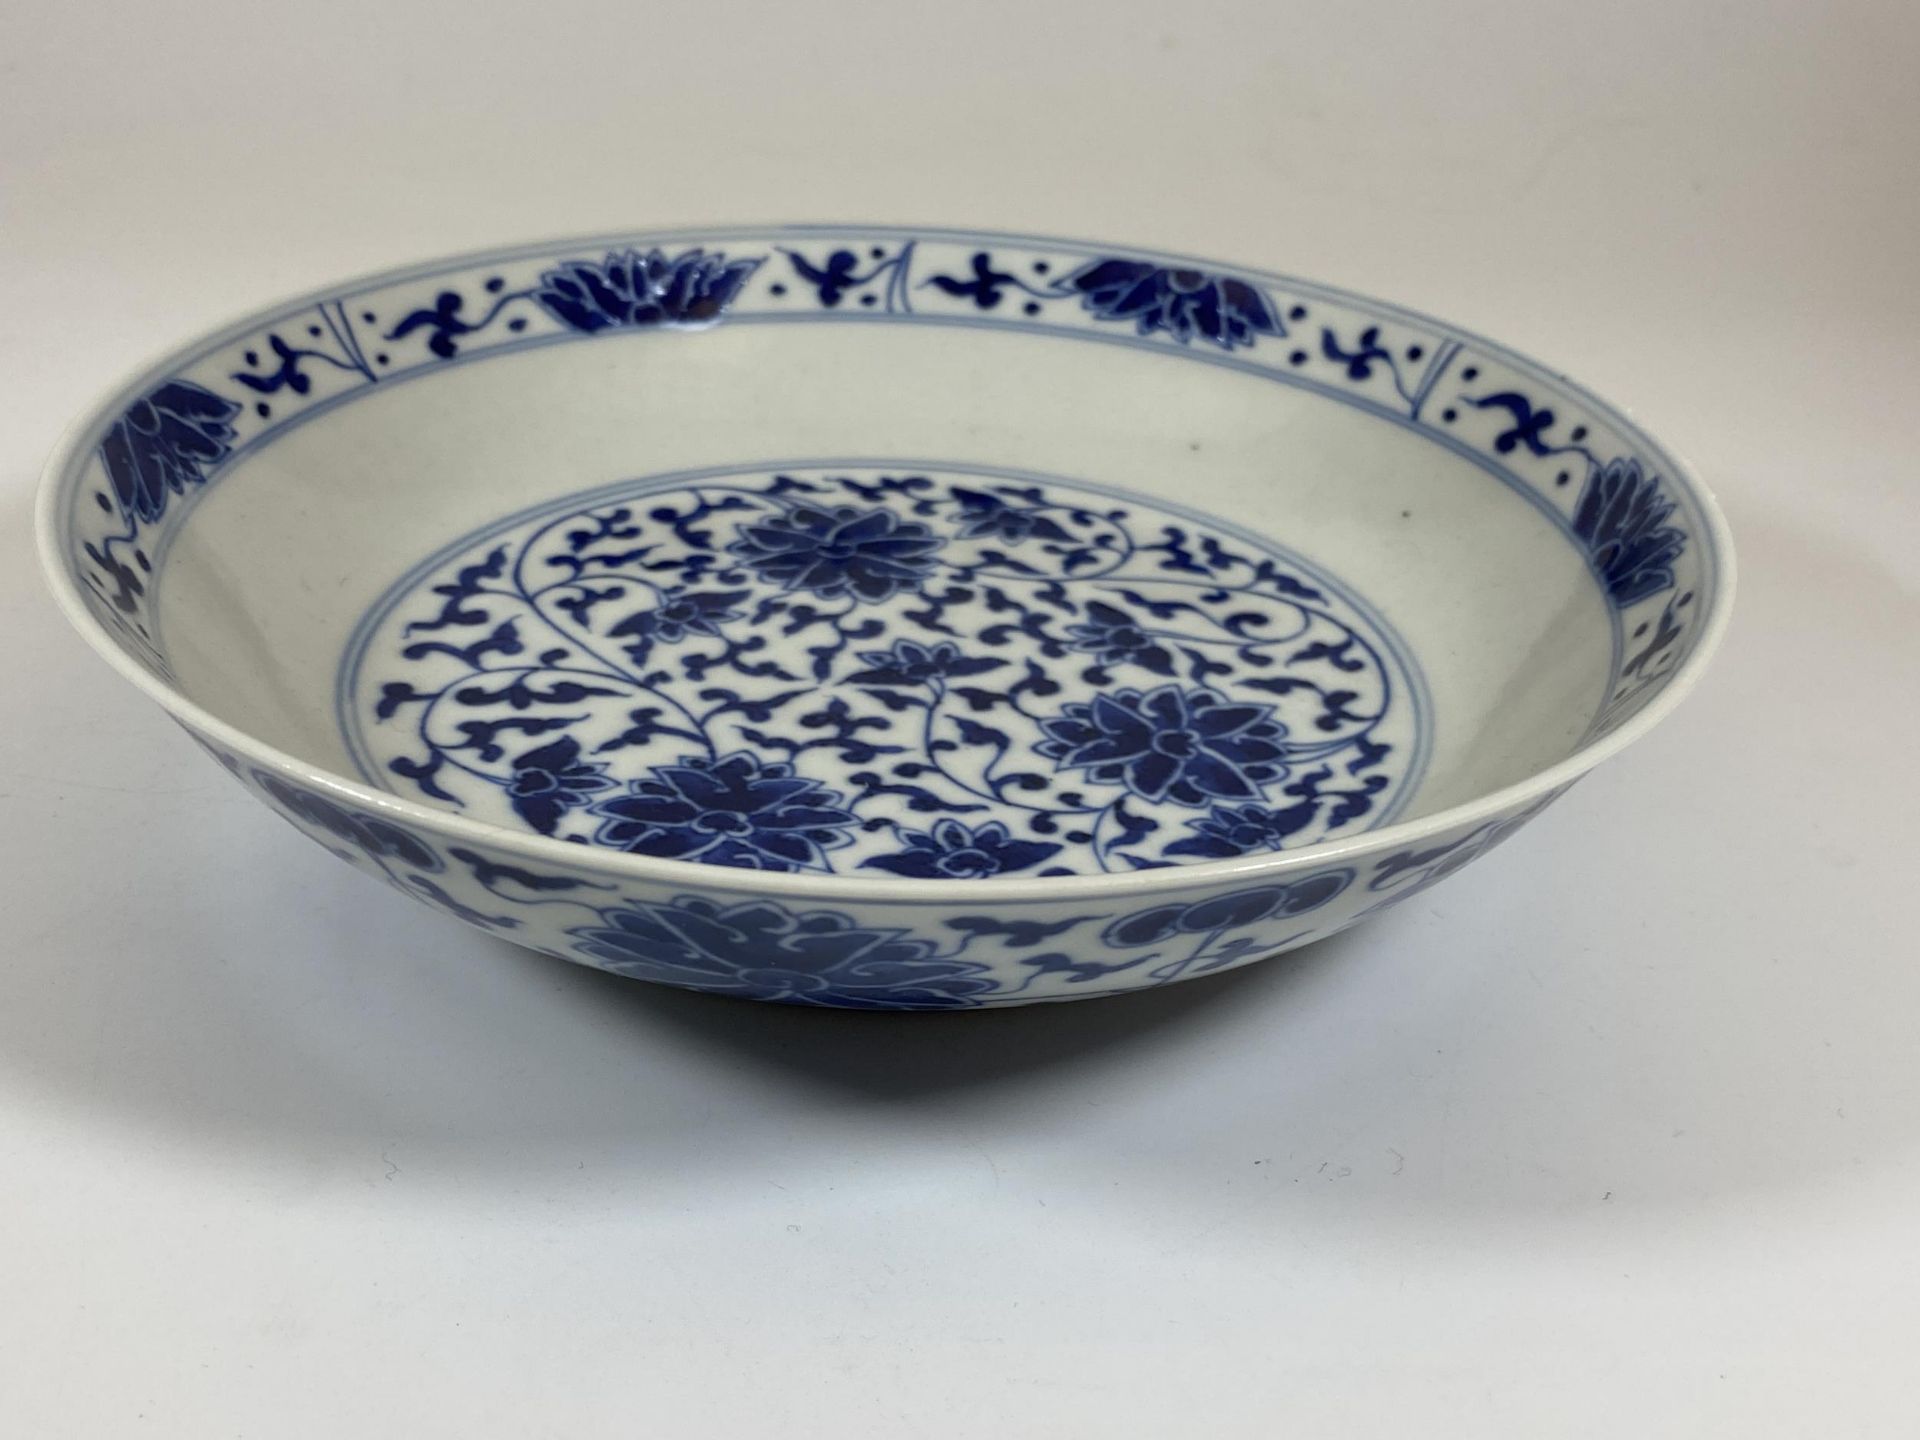 A CHINESE QIANLONG STYLE BLUE AND WHITE FLORAL BOWL / DISH, SIX CHARACTER MARK TO BASE, DIAMETER - Bild 3 aus 6